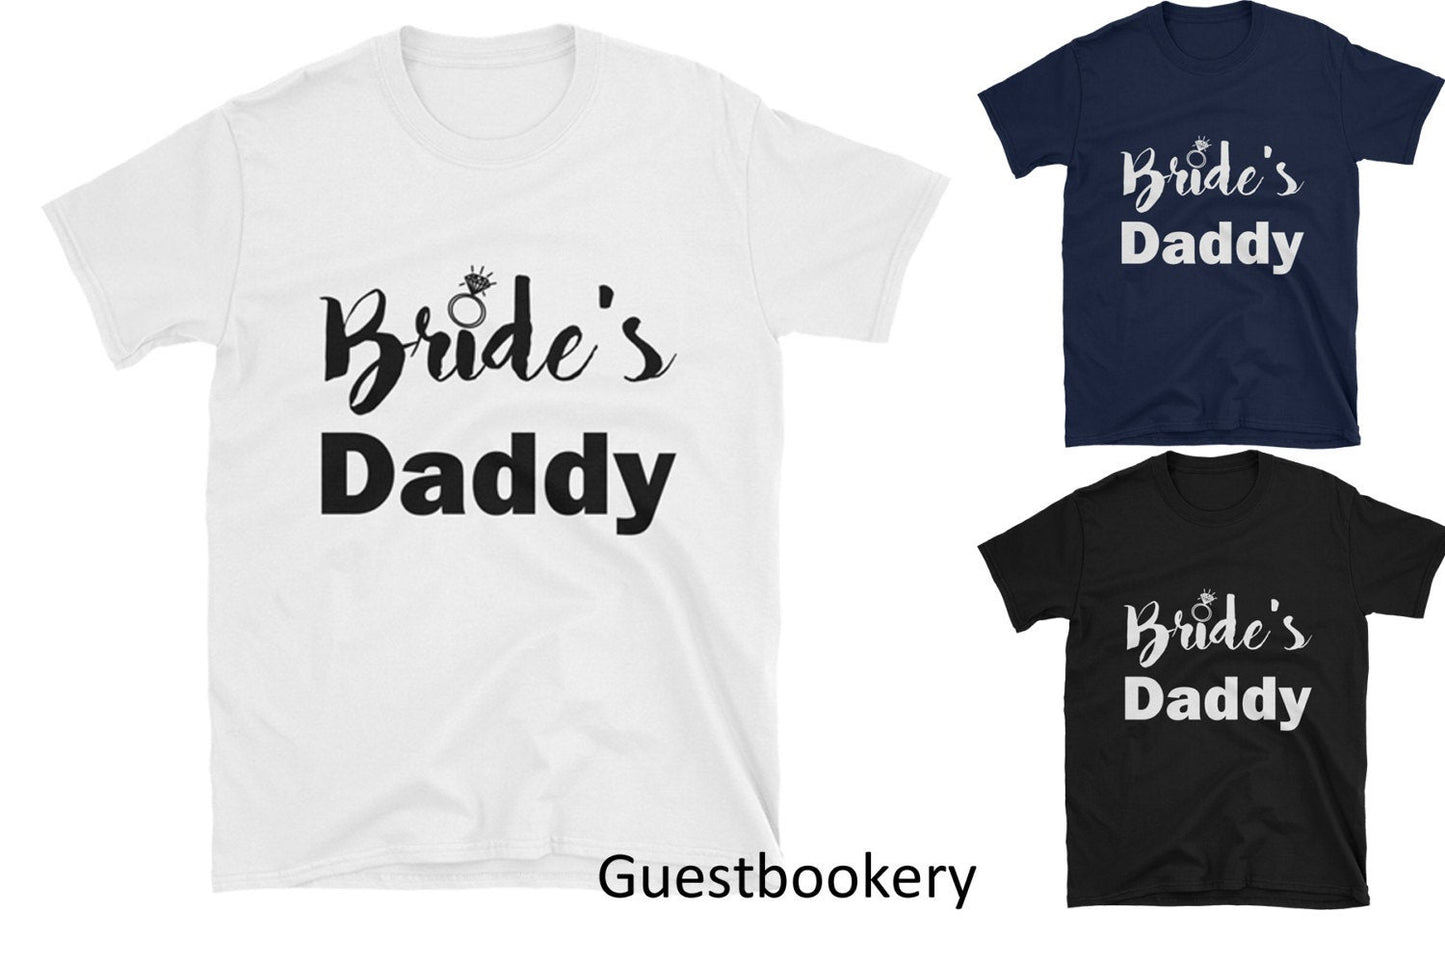 Bride's Daddy T-shirt